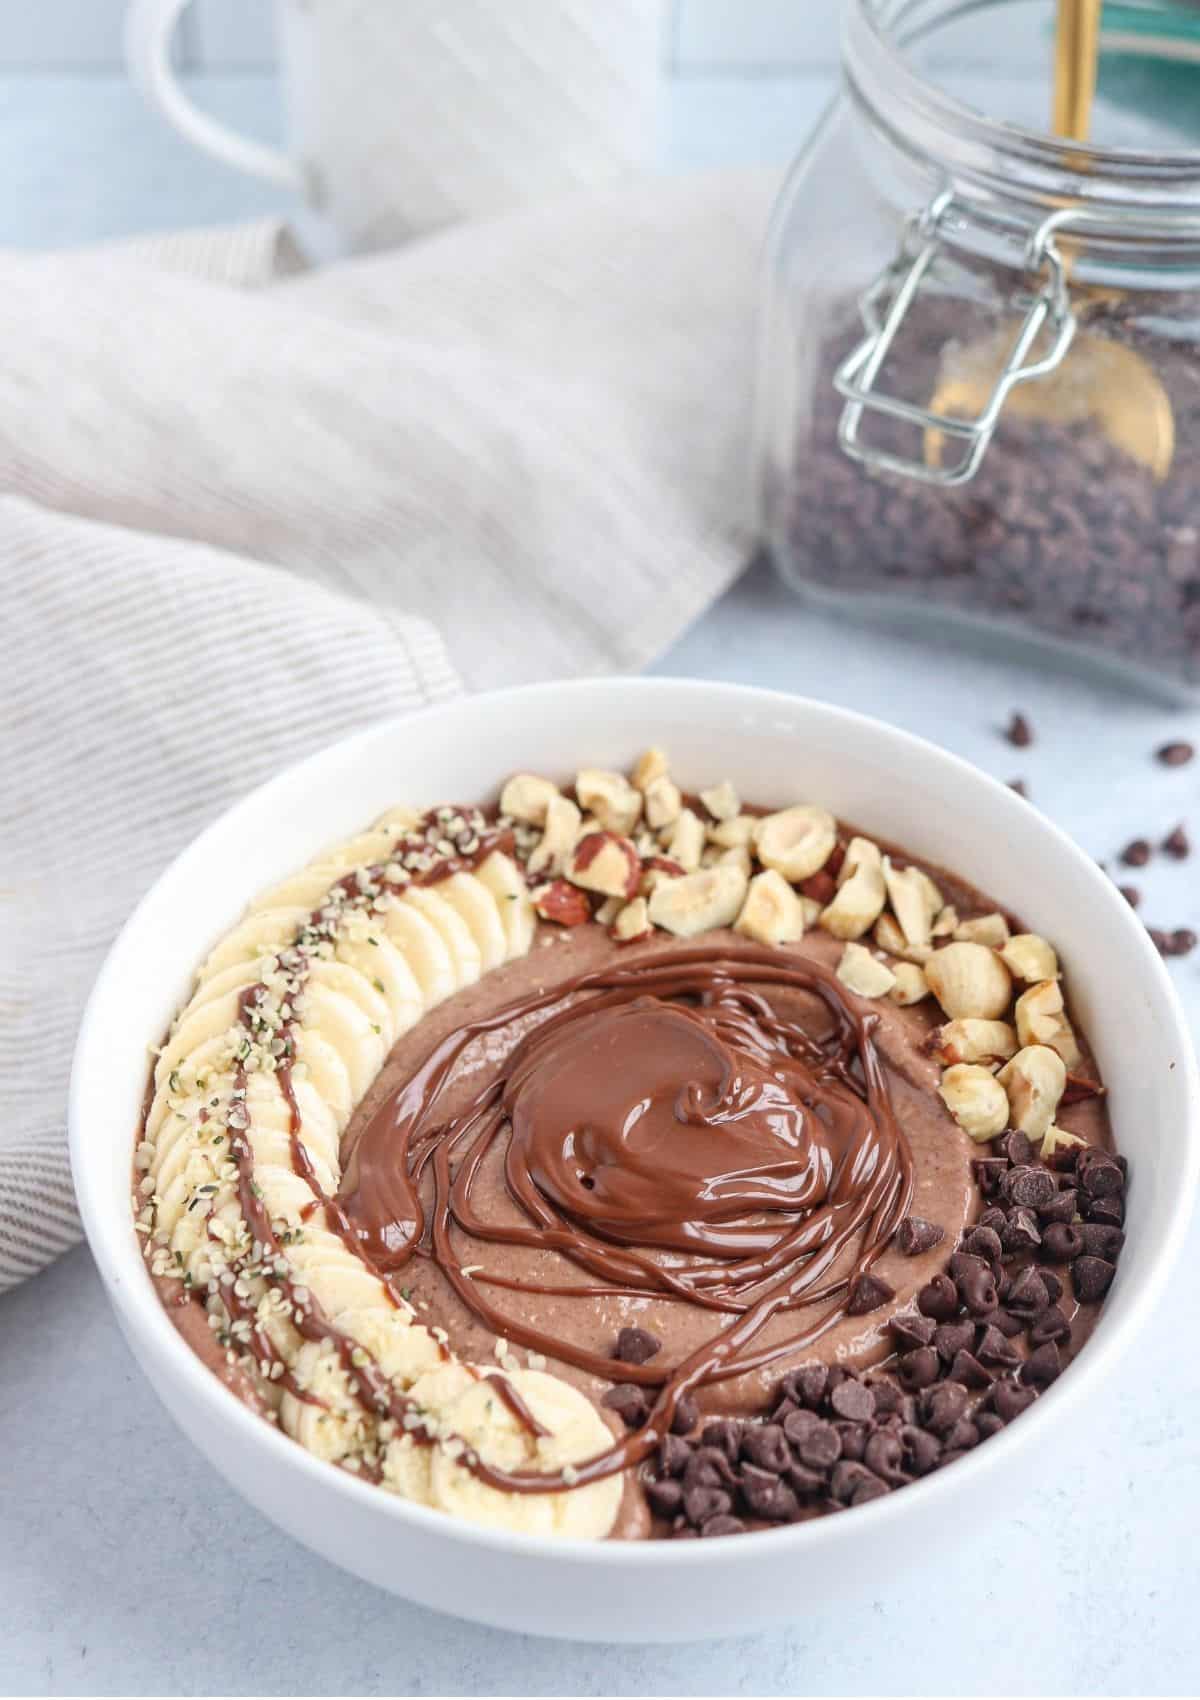 Nutella smoothie bowl in a white bowl topped with sliced banana, melted Nutella, toasted hazelnuts and mini chocolate chips.